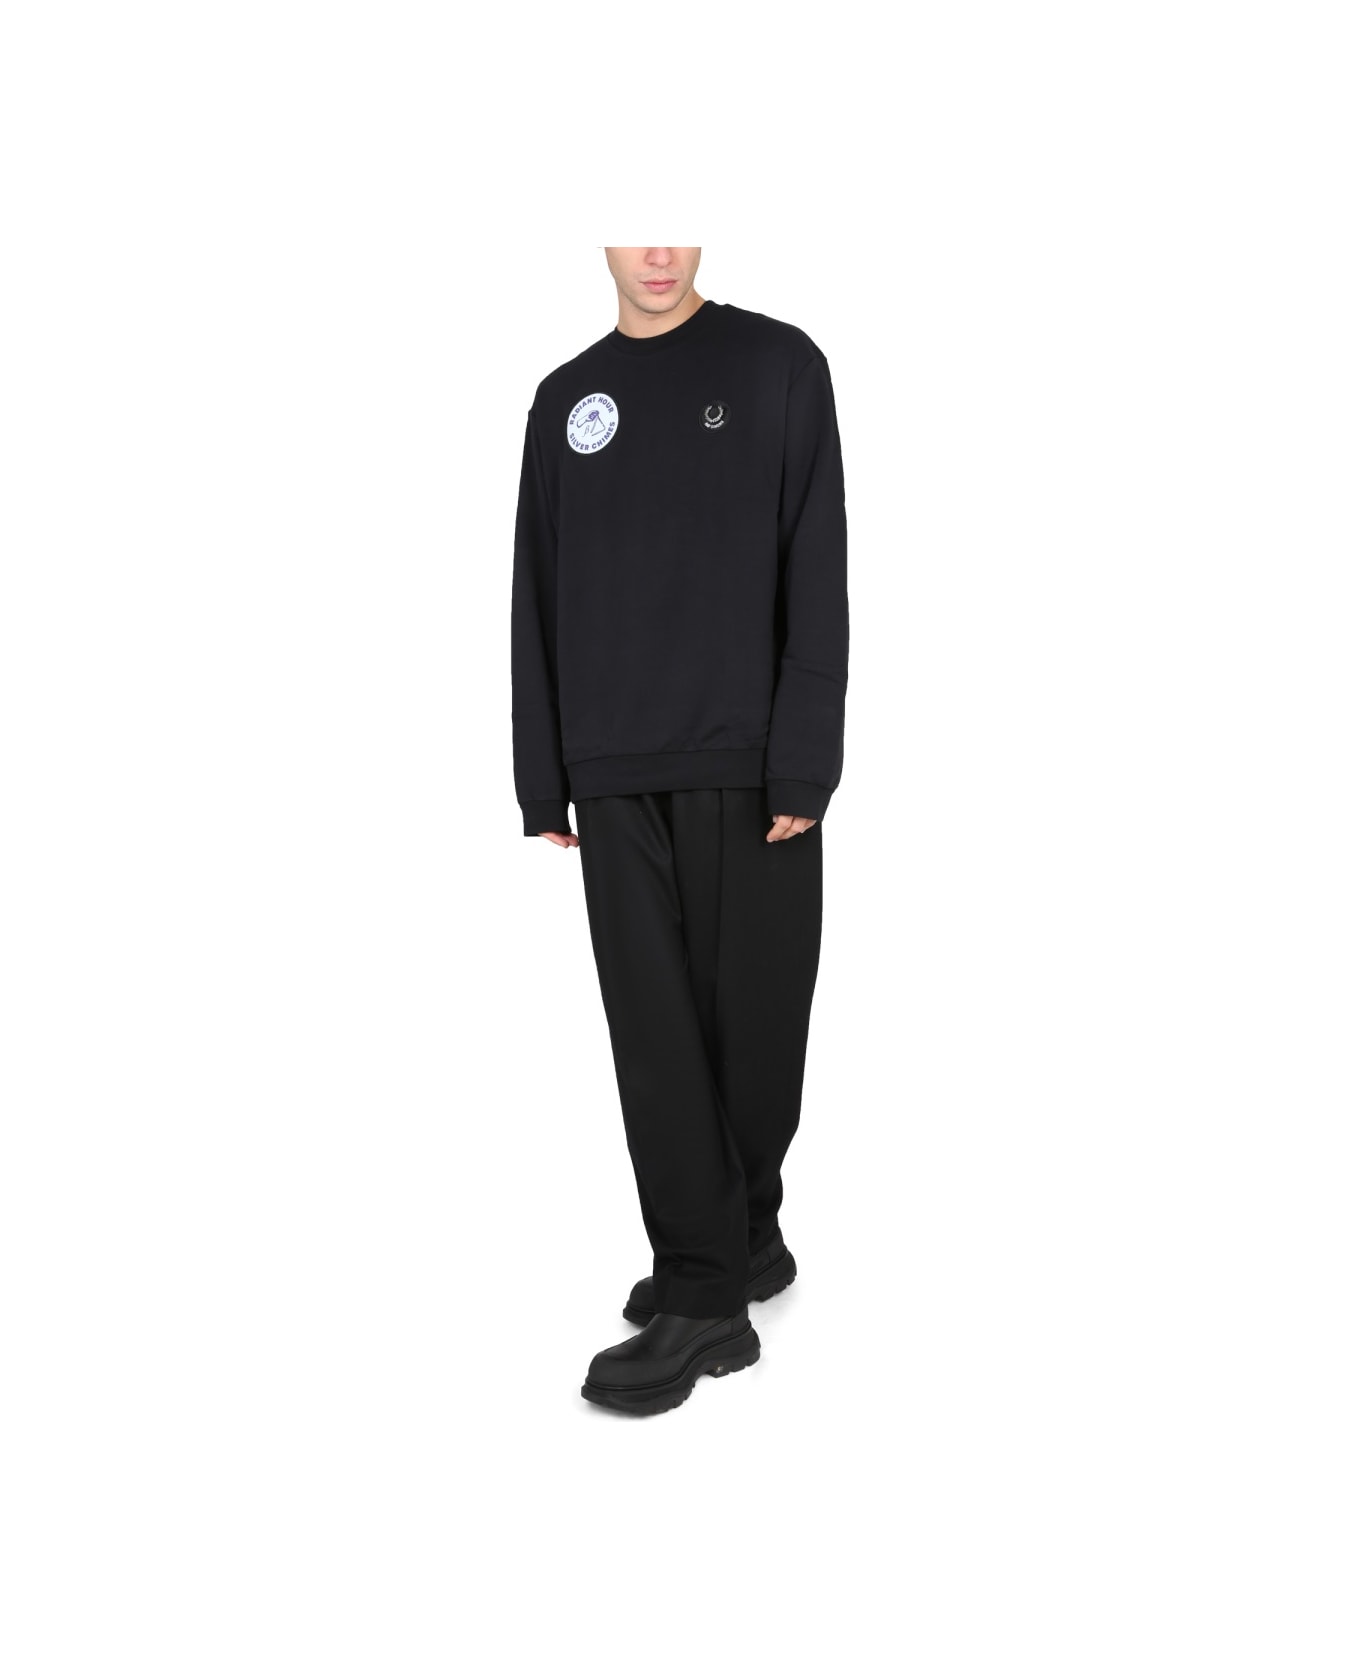 Fred Perry by Raf Simons Sweatshirt With Patch - BLACK